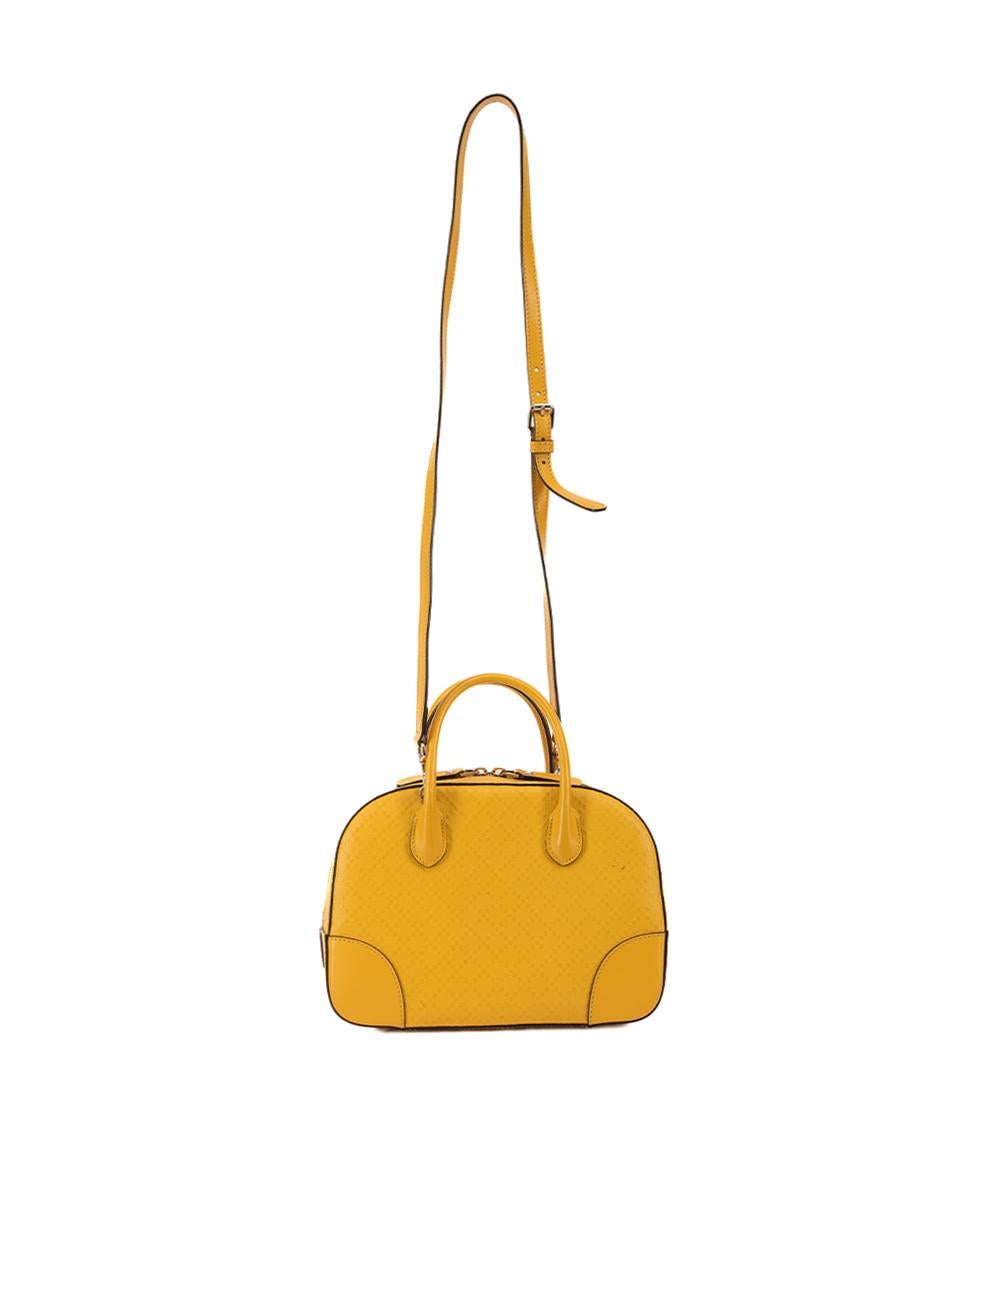 Gucci Women's Yellow Bright Diamante Leather Satchel In Excellent Condition In London, GB